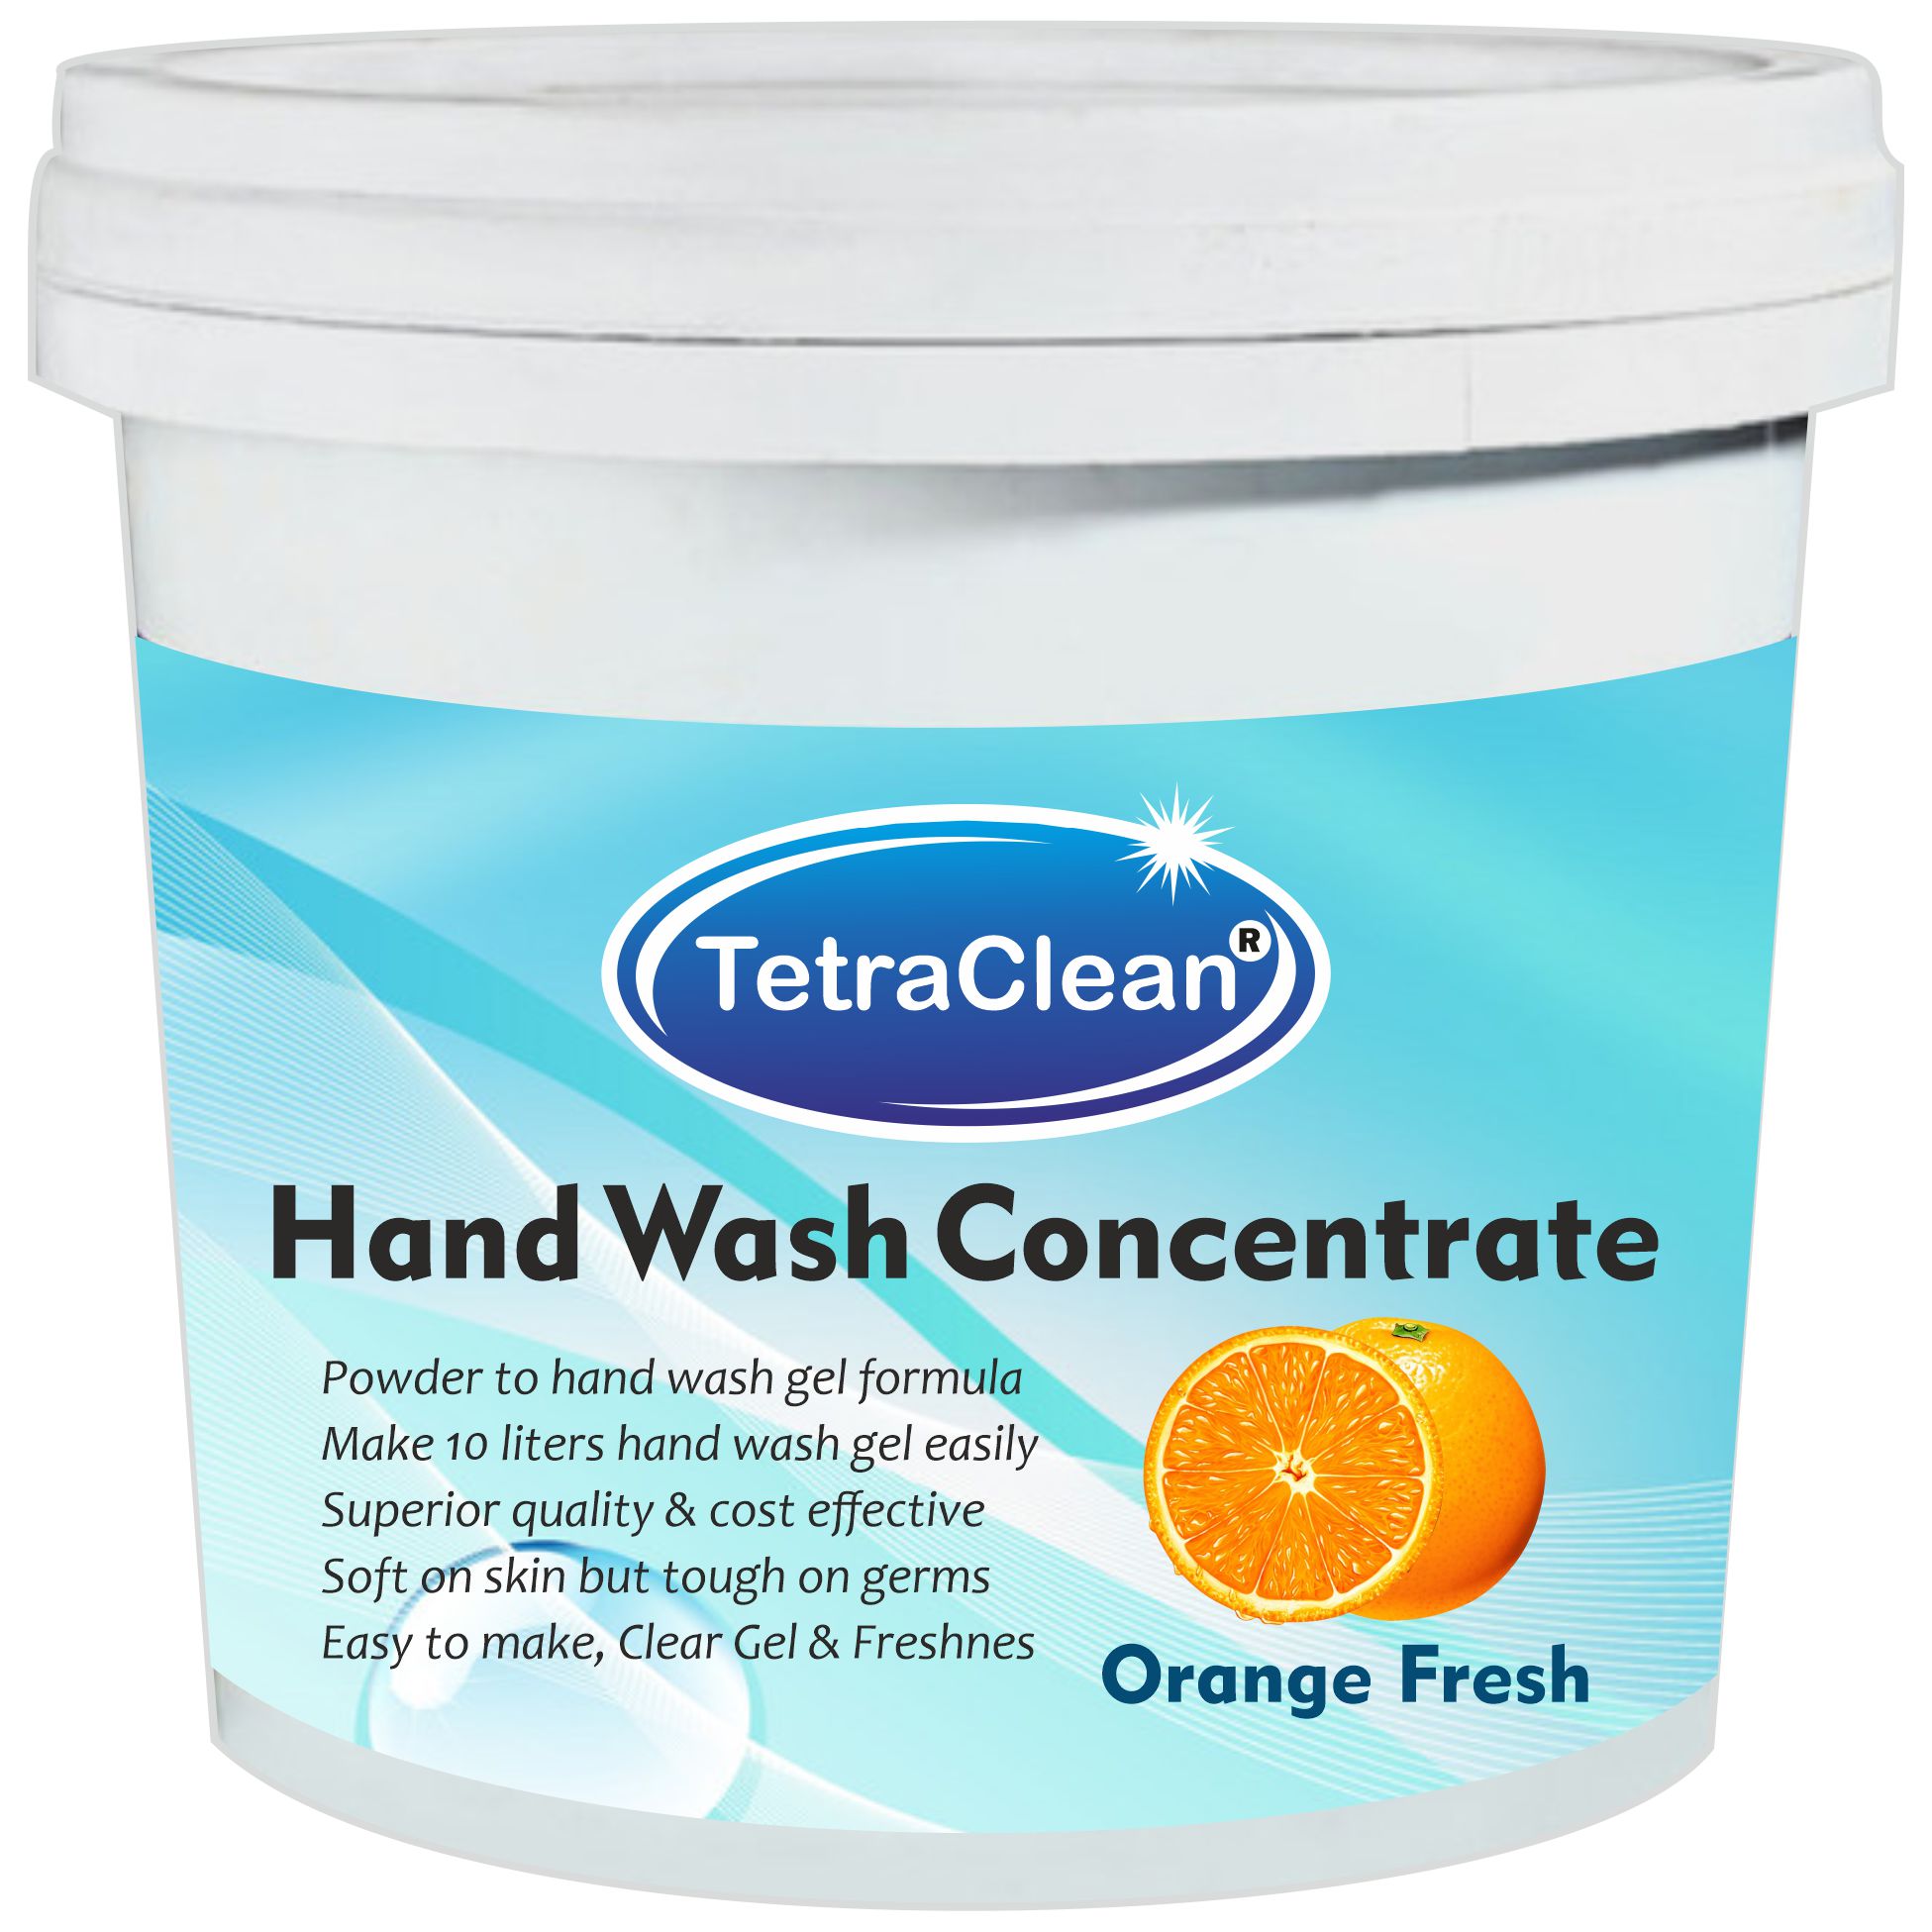 TetraClean Hand Wash Concentrate Powder - 500gm packing - with orange fragrance